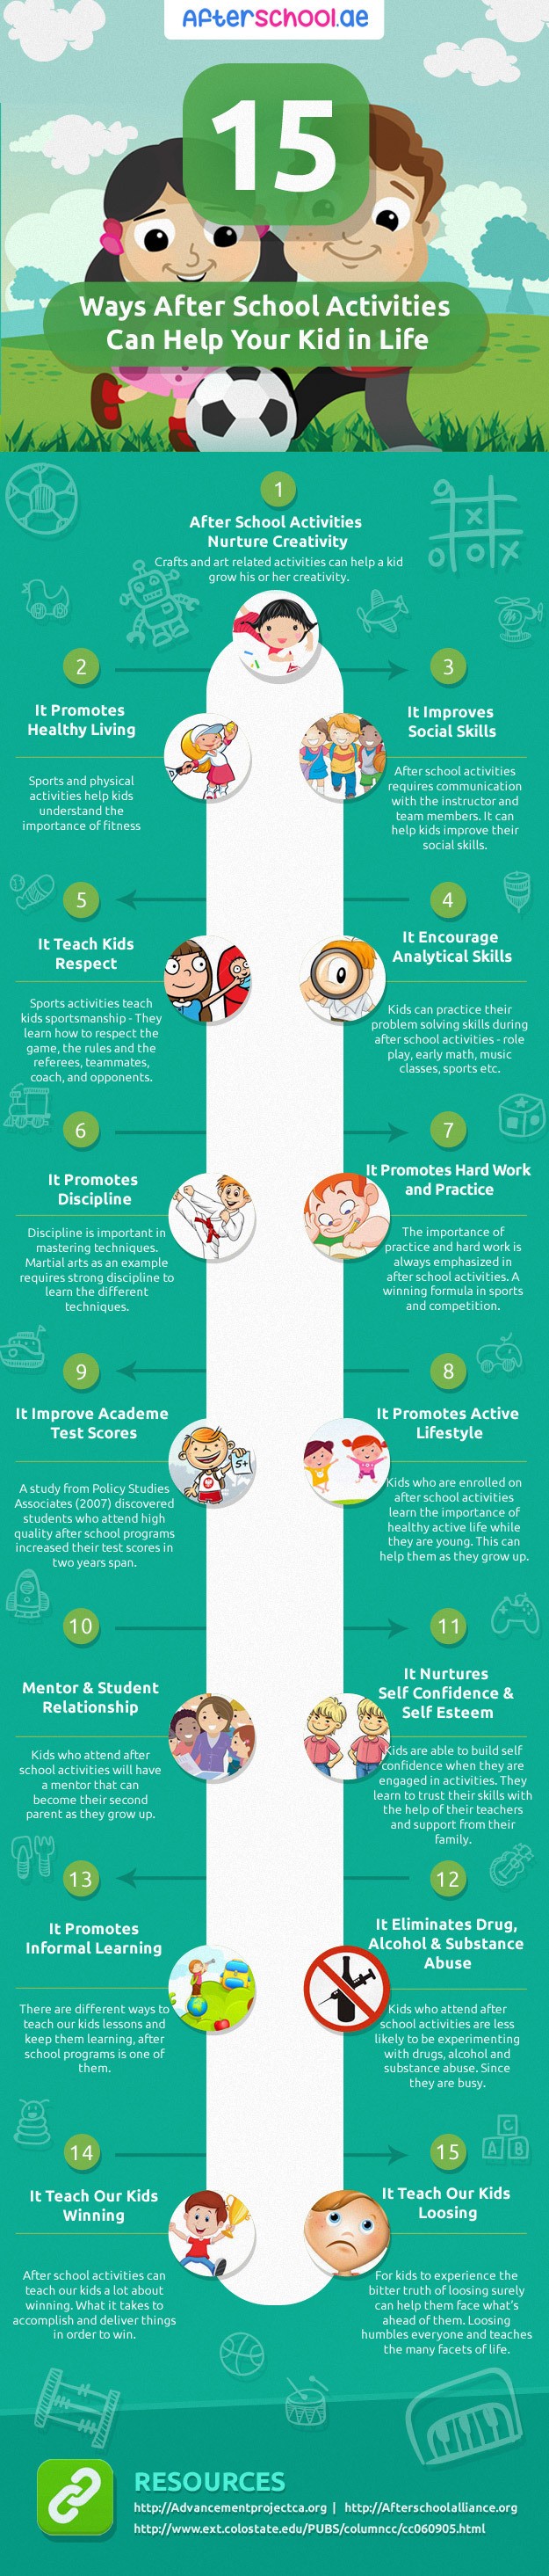 15 Ways After School Activities Can Help Kids Infographic - e-Learning ...